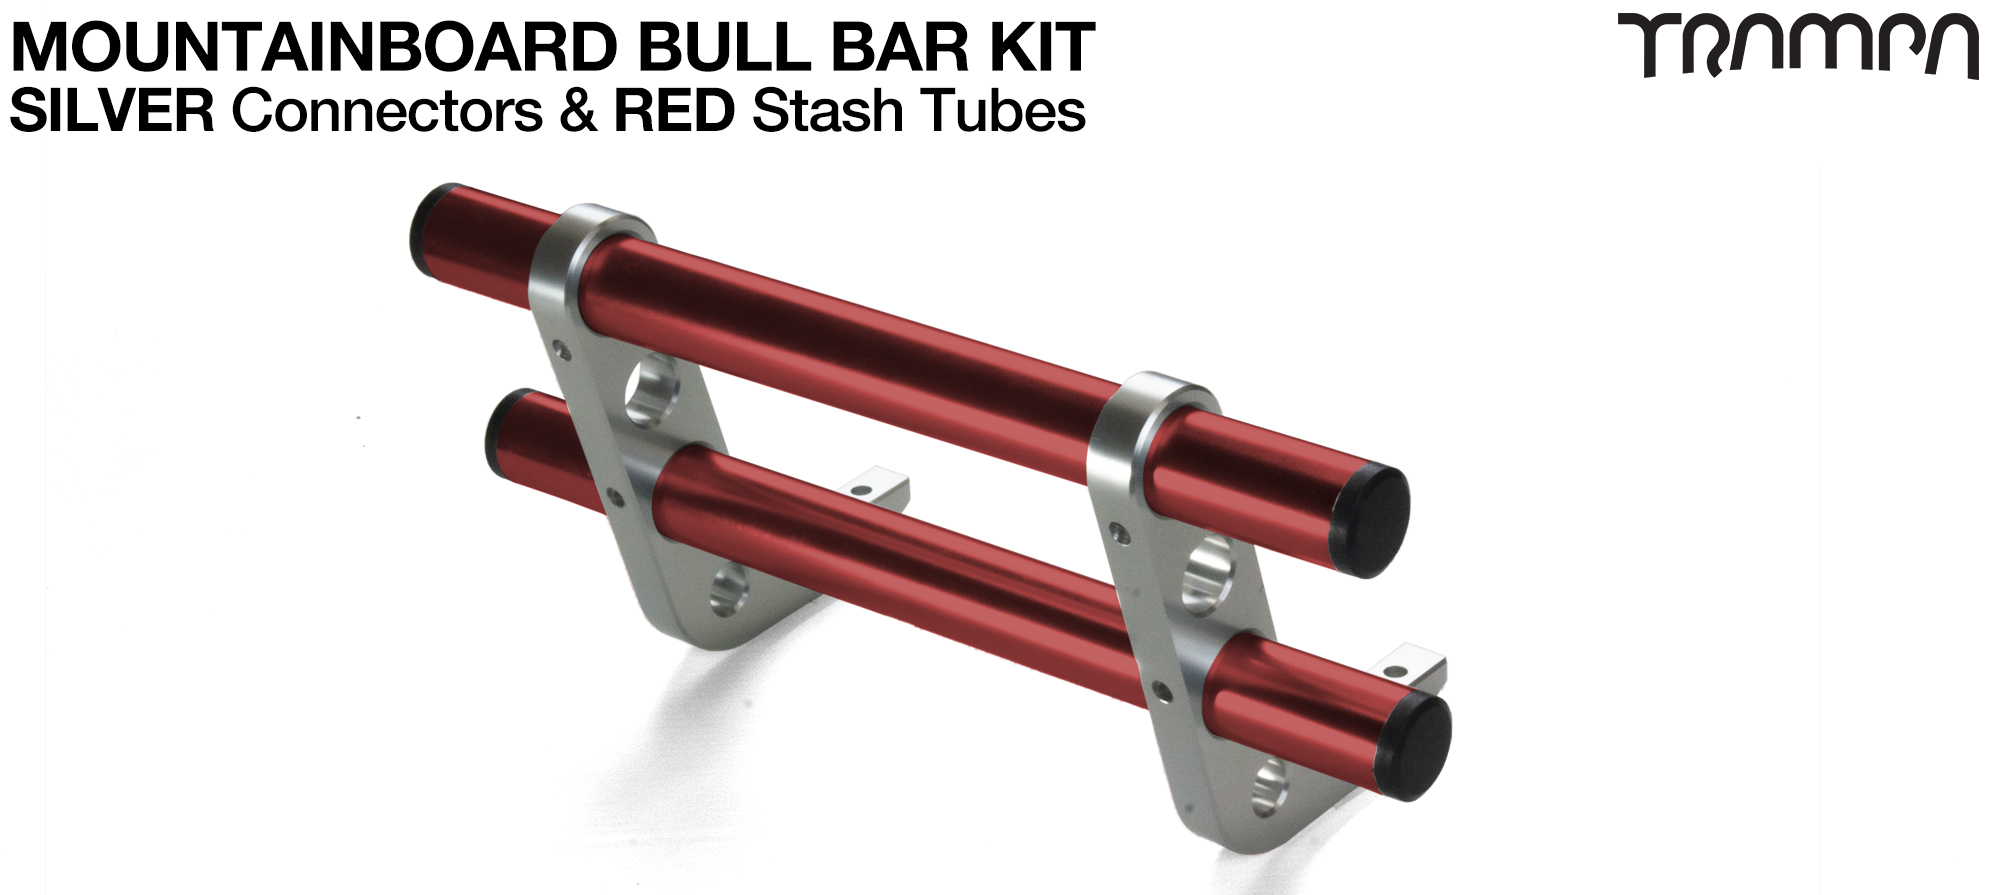 SILVER Uprights & RED Crossbar BULL BARS for MOUNTAINBOARDS T6 Heat Treated CNC'd Aluminium Uprights, with Hollow Aluminium Stash Tubes with Rubber end bungs